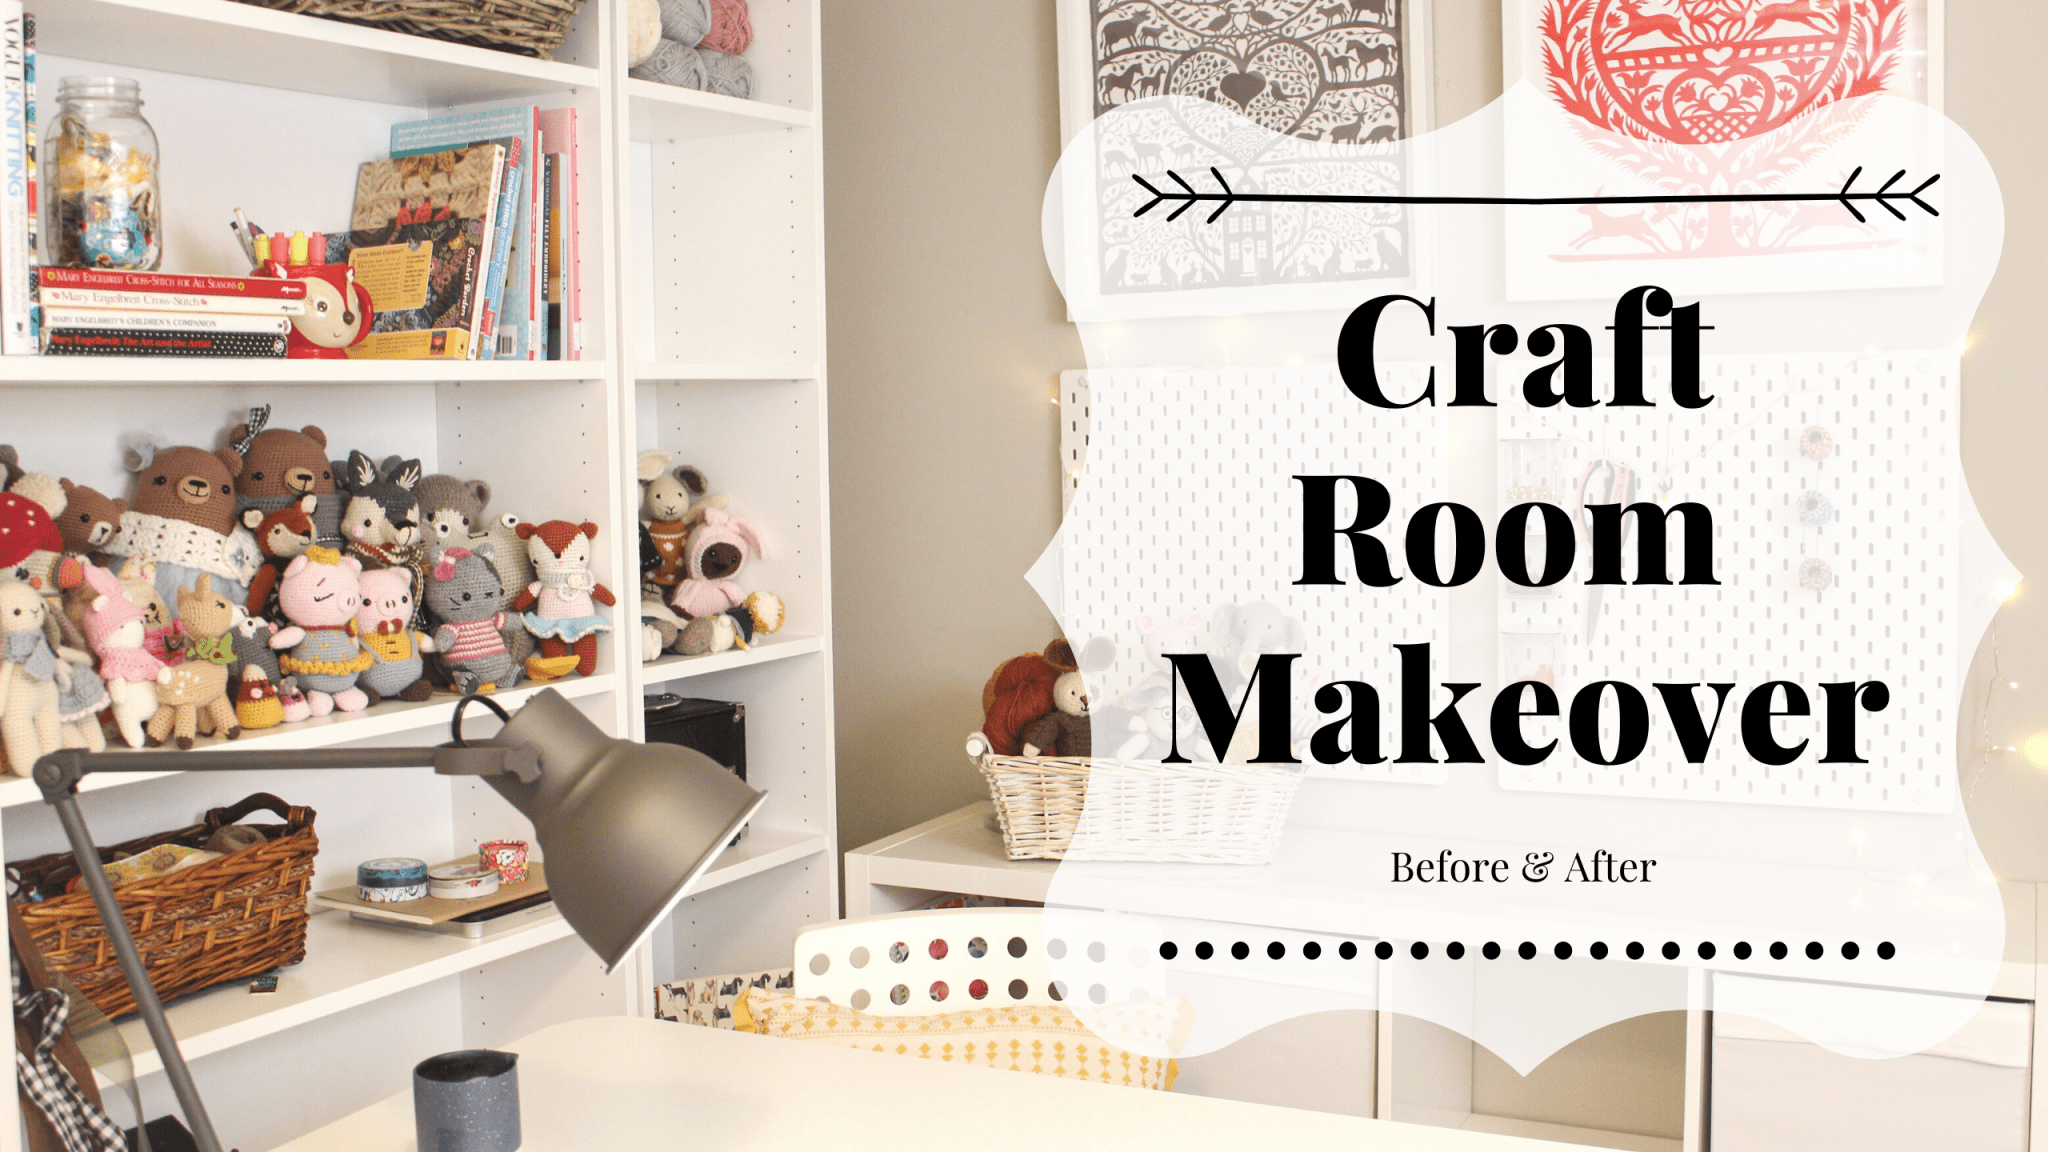 Craft Room Makeover: Before and After